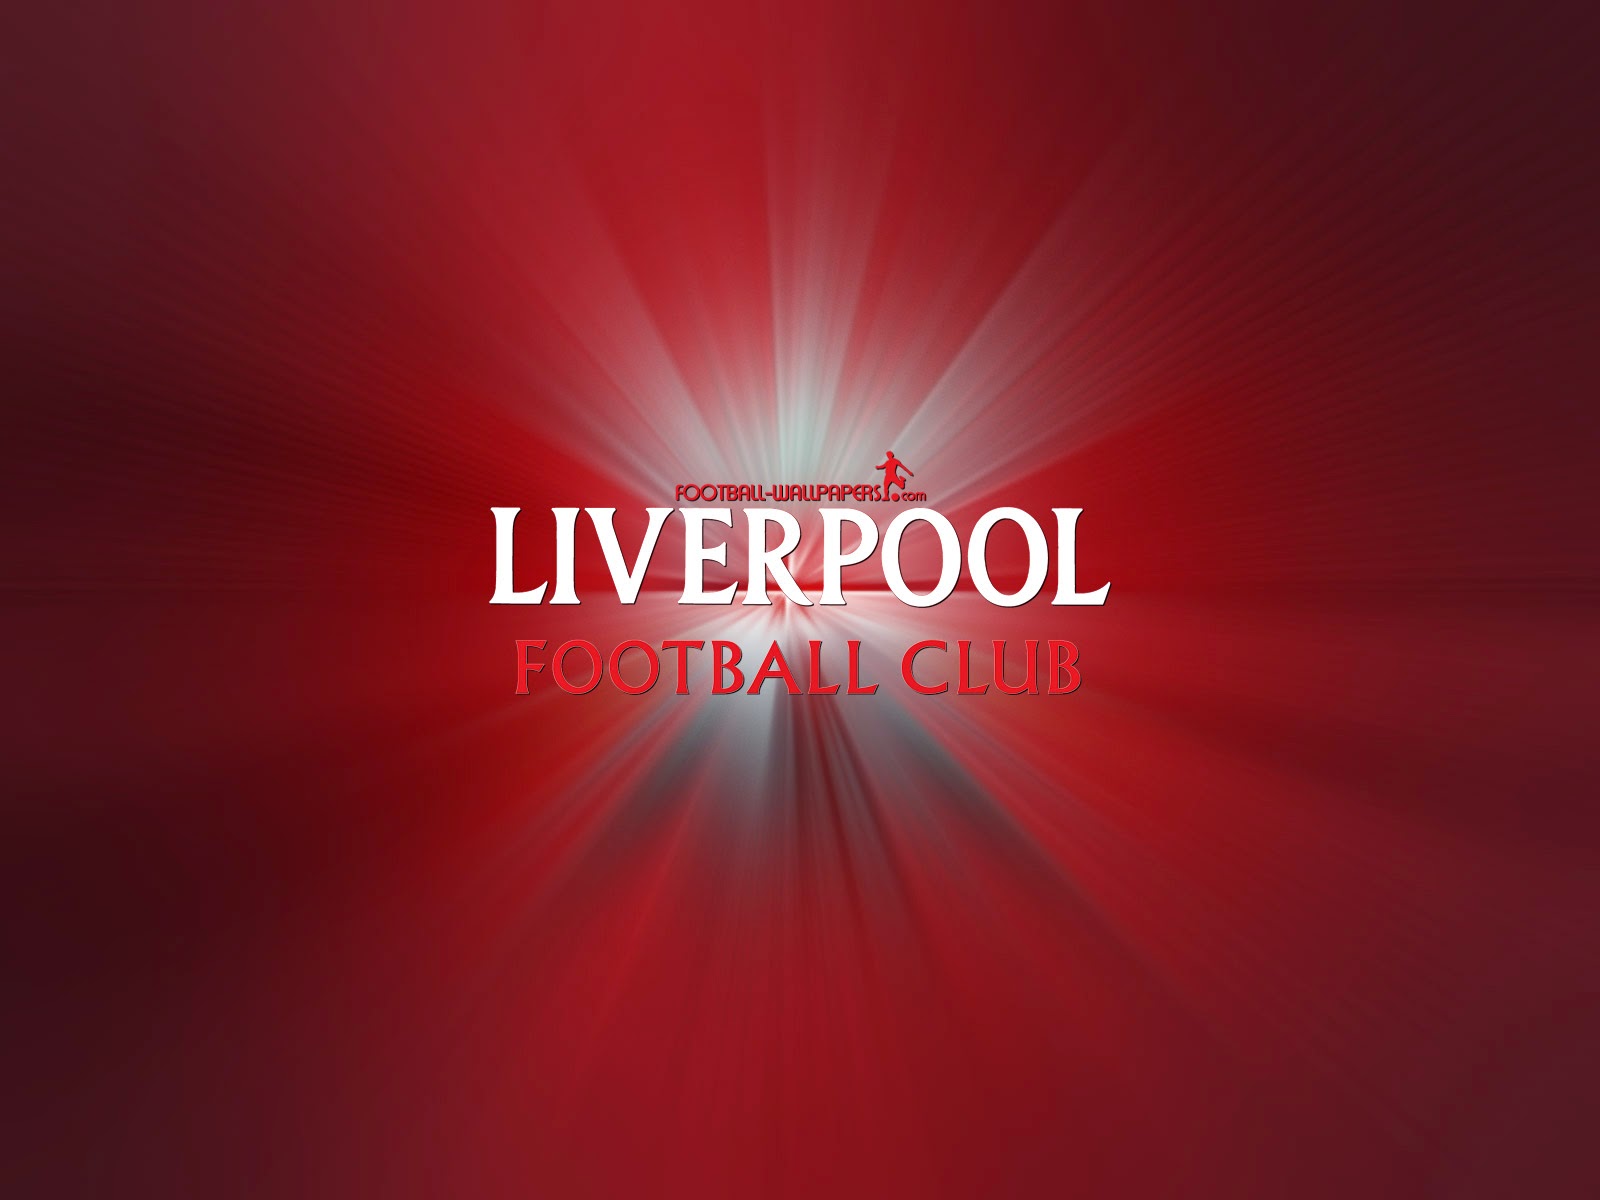 Download Liverpool Fc Wallpapers In Hd For Desktop Or Gadget Free